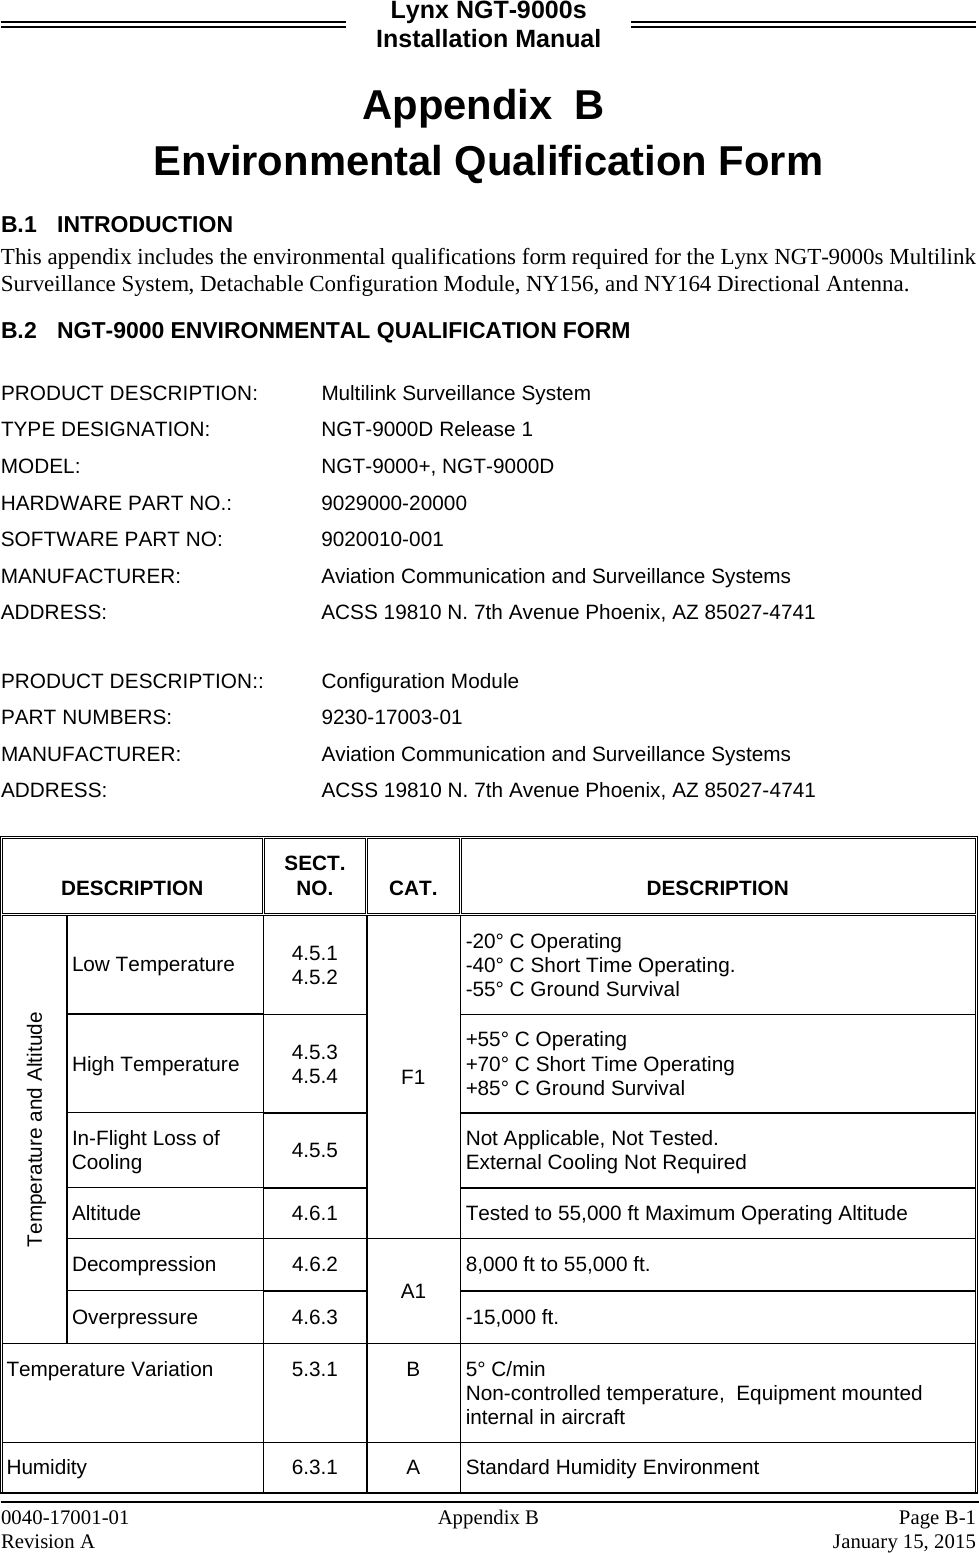 Lynx NGT-9000s Installation Manual  Appendix B  Environmental Qualification Form  B.1 INTRODUCTION  This appendix includes the environmental qualifications form required for the Lynx NGT-9000s Multilink Surveillance System, Detachable Configuration Module, NY156, and NY164 Directional Antenna.   B.2 NGT-9000 ENVIRONMENTAL QUALIFICATION FORM   PRODUCT DESCRIPTION: Multilink Surveillance System TYPE DESIGNATION: NGT-9000D Release 1 MODEL: NGT-9000+, NGT-9000D HARDWARE PART NO.: 9029000-20000 SOFTWARE PART NO: 9020010-001 MANUFACTURER: Aviation Communication and Surveillance Systems ADDRESS: ACSS 19810 N. 7th Avenue Phoenix, AZ 85027-4741  PRODUCT DESCRIPTION:: Configuration Module PART NUMBERS: 9230-17003-01 MANUFACTURER: Aviation Communication and Surveillance Systems ADDRESS: ACSS 19810 N. 7th Avenue Phoenix, AZ 85027-4741  DESCRIPTION SECT. NO. CAT. DESCRIPTION Temperature and Altitude Low Temperature 4.5.1 4.5.2 F1 -20° C Operating -40° C Short Time Operating.  -55° C Ground Survival High Temperature 4.5.3 4.5.4 +55° C Operating +70° C Short Time Operating +85° C Ground Survival In-Flight Loss of Cooling 4.5.5 Not Applicable, Not Tested. External Cooling Not Required Altitude 4.6.1 Tested to 55,000 ft Maximum Operating Altitude Decompression 4.6.2 A1 8,000 ft to 55,000 ft. Overpressure 4.6.3  -15,000 ft. Temperature Variation 5.3.1  B  5° C/min  Non-controlled temperature,  Equipment mounted internal in aircraft Humidity 6.3.1  A  Standard Humidity Environment 0040-17001-01    Appendix B  Page B-1 Revision A    January 15, 2015 